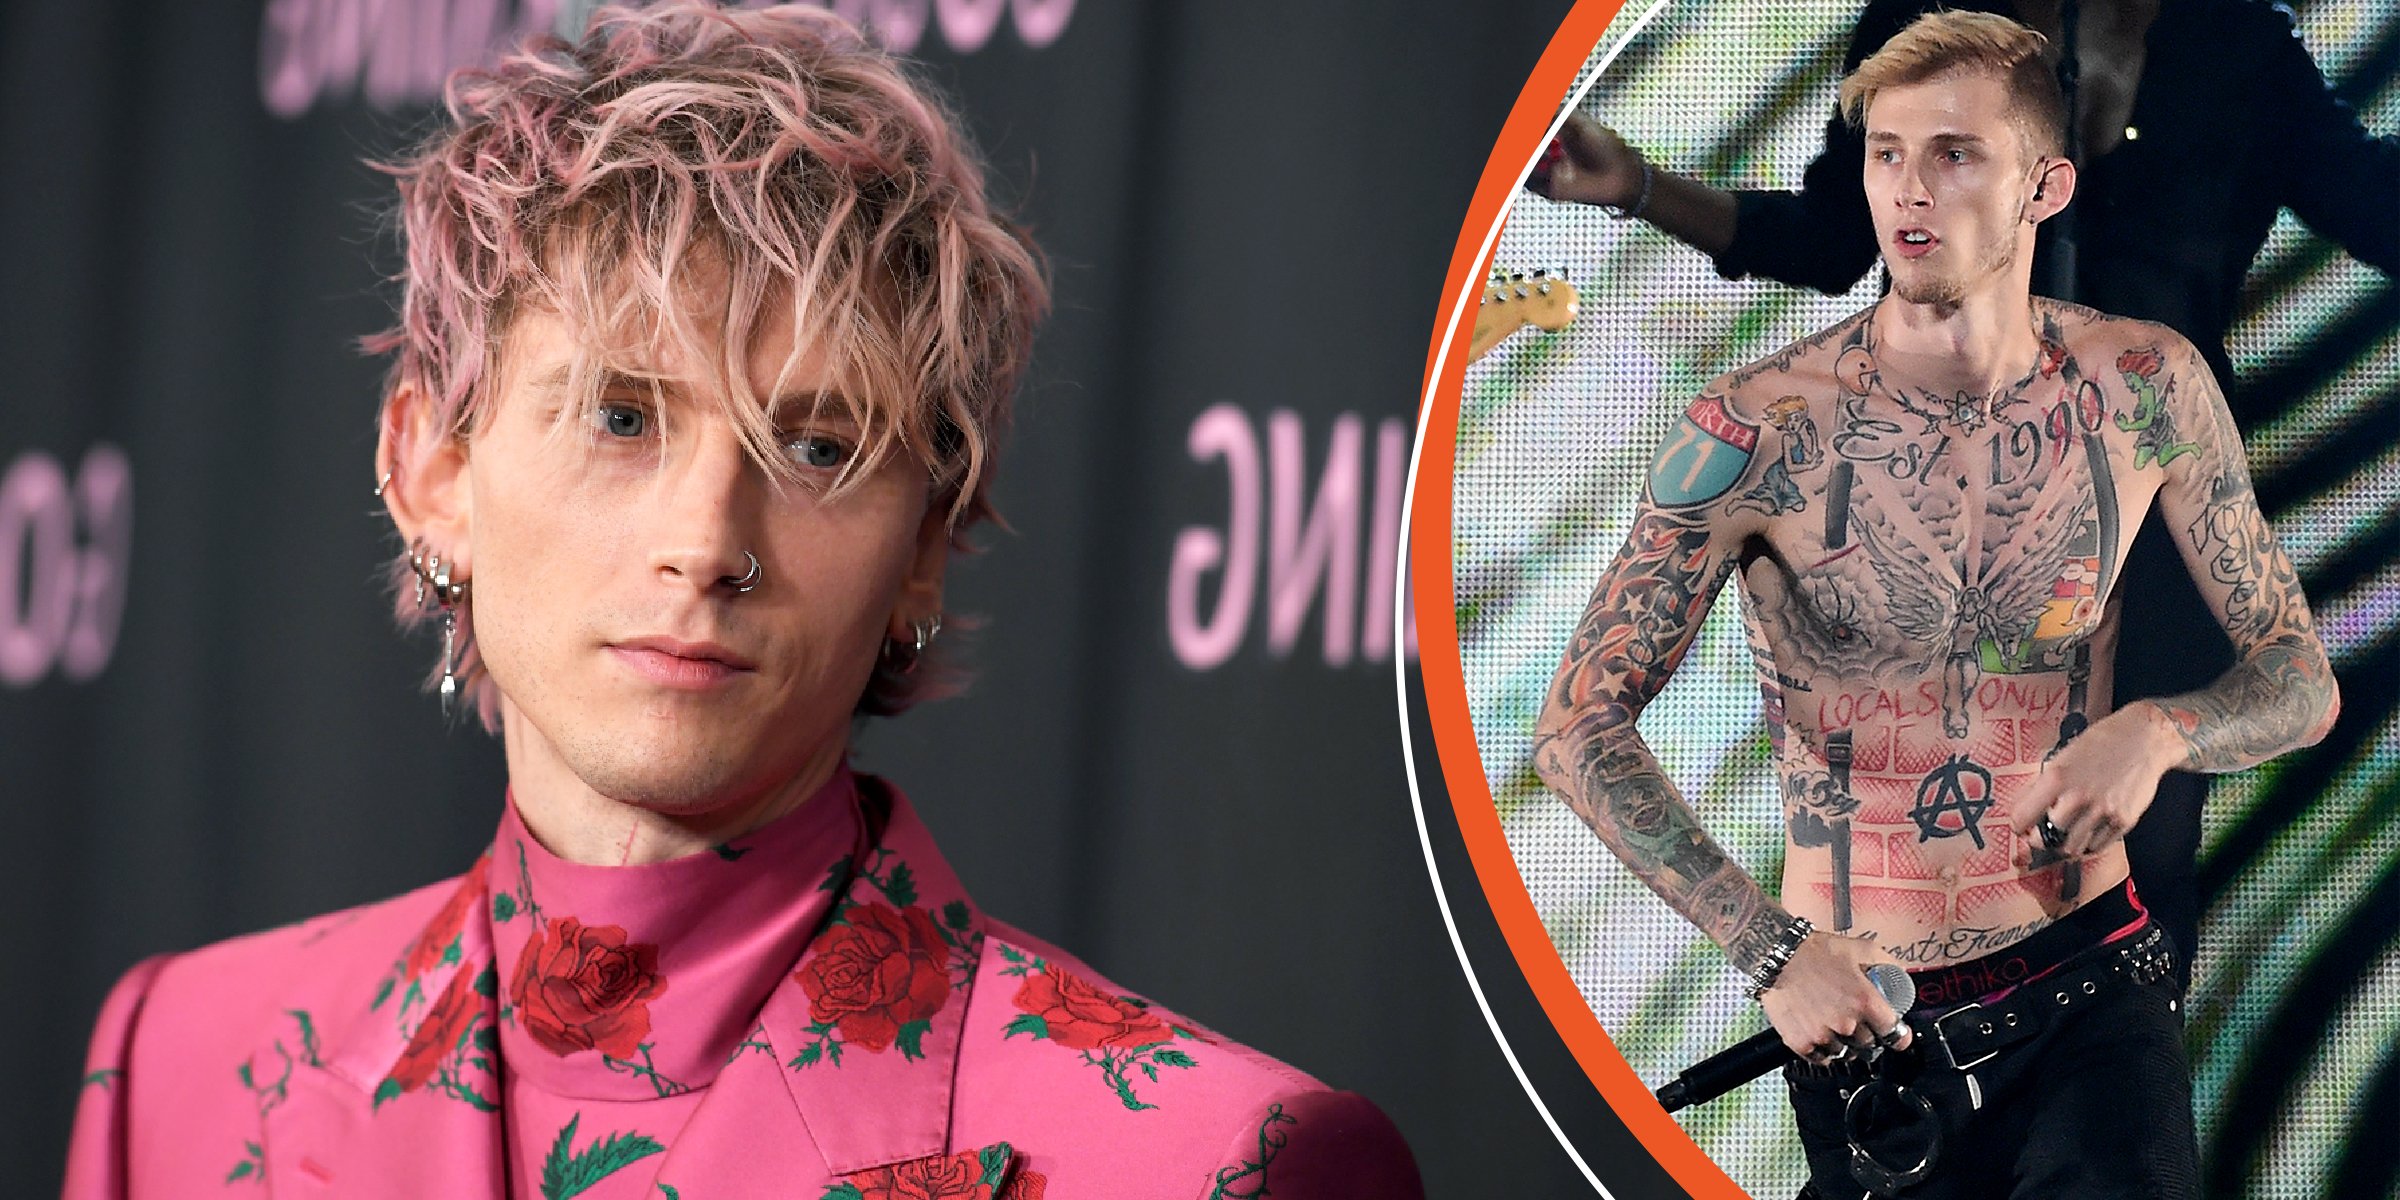 MACHINE GUN KELLY UPDATES on Twitter MACHINE GUN KELLY TATTOOS   read about the meanings of machinegunkelly tattoos  httpstcoVFXpS9PDGx  Twitter